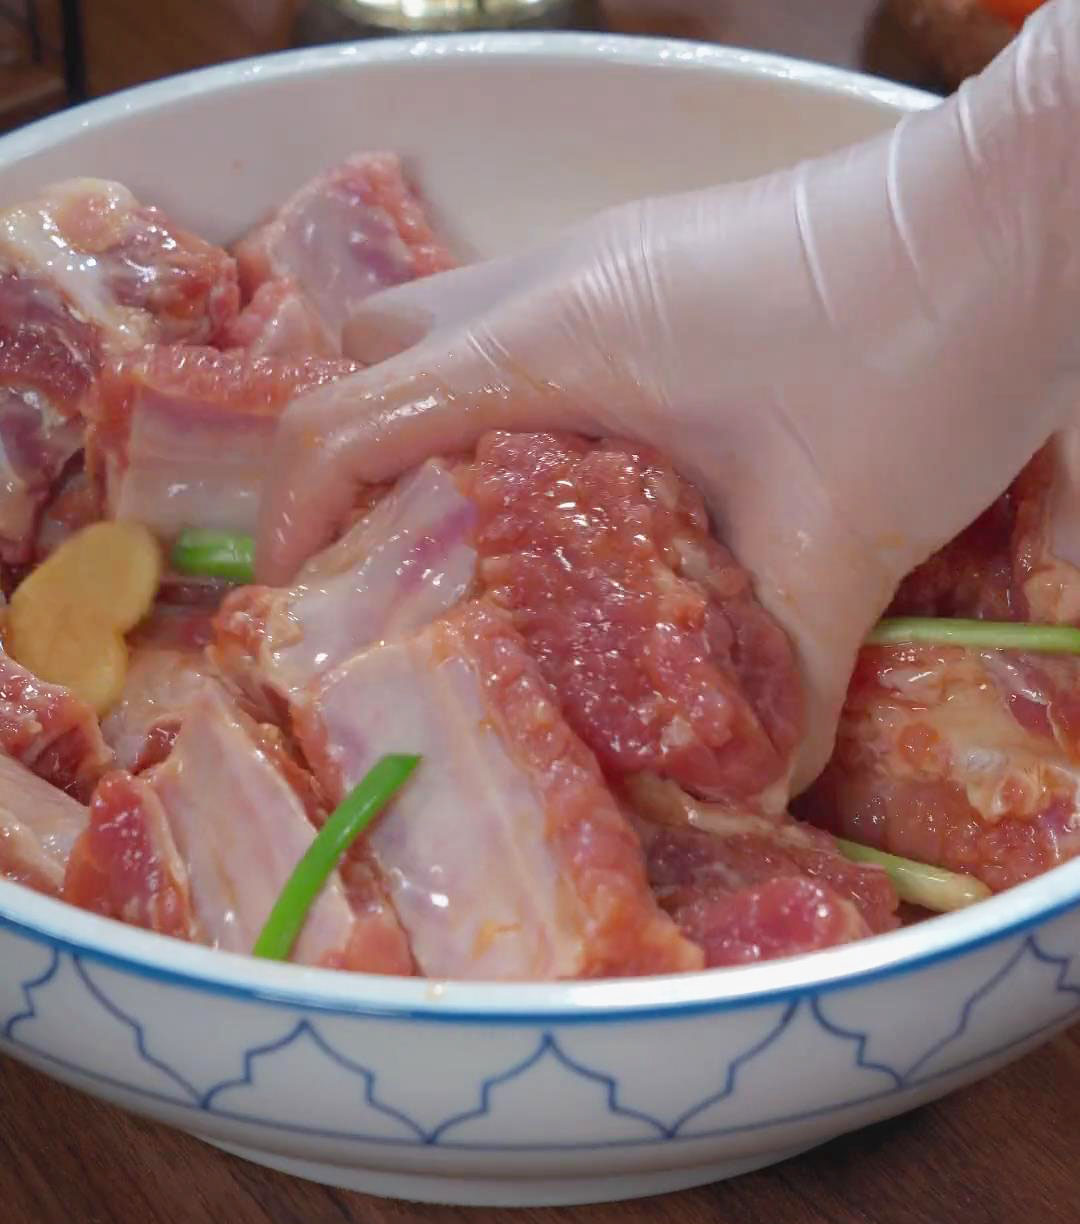 Massage the marinade to the ribs to fully absorb the flavors